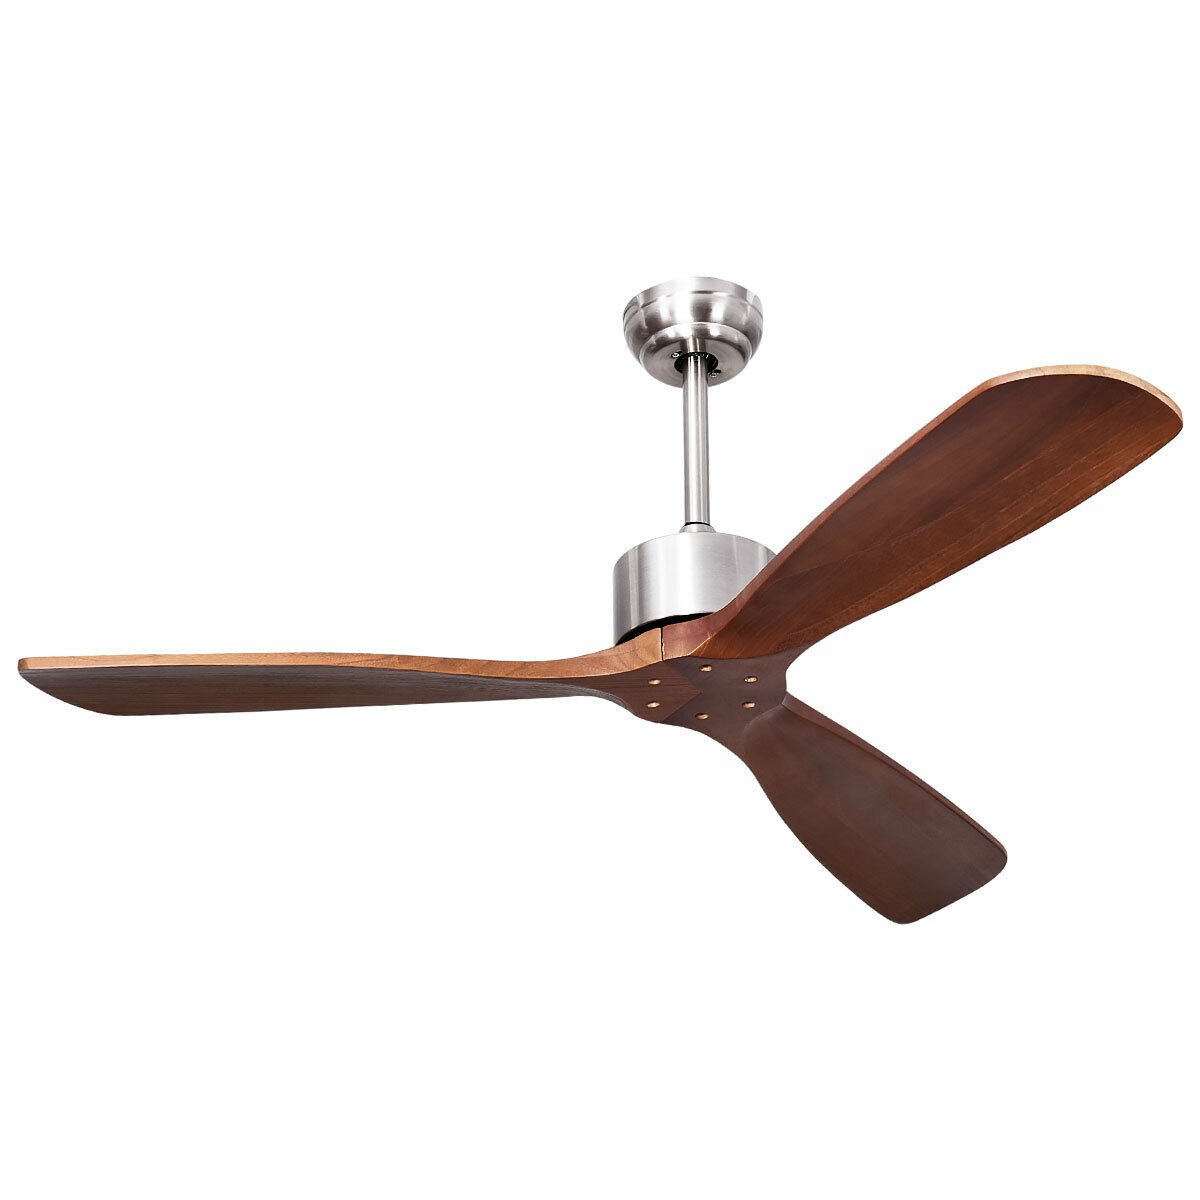 52 Inch Modern Brushed Nickel Finish Ceiling Fan with Remote Control - Gallery Canada